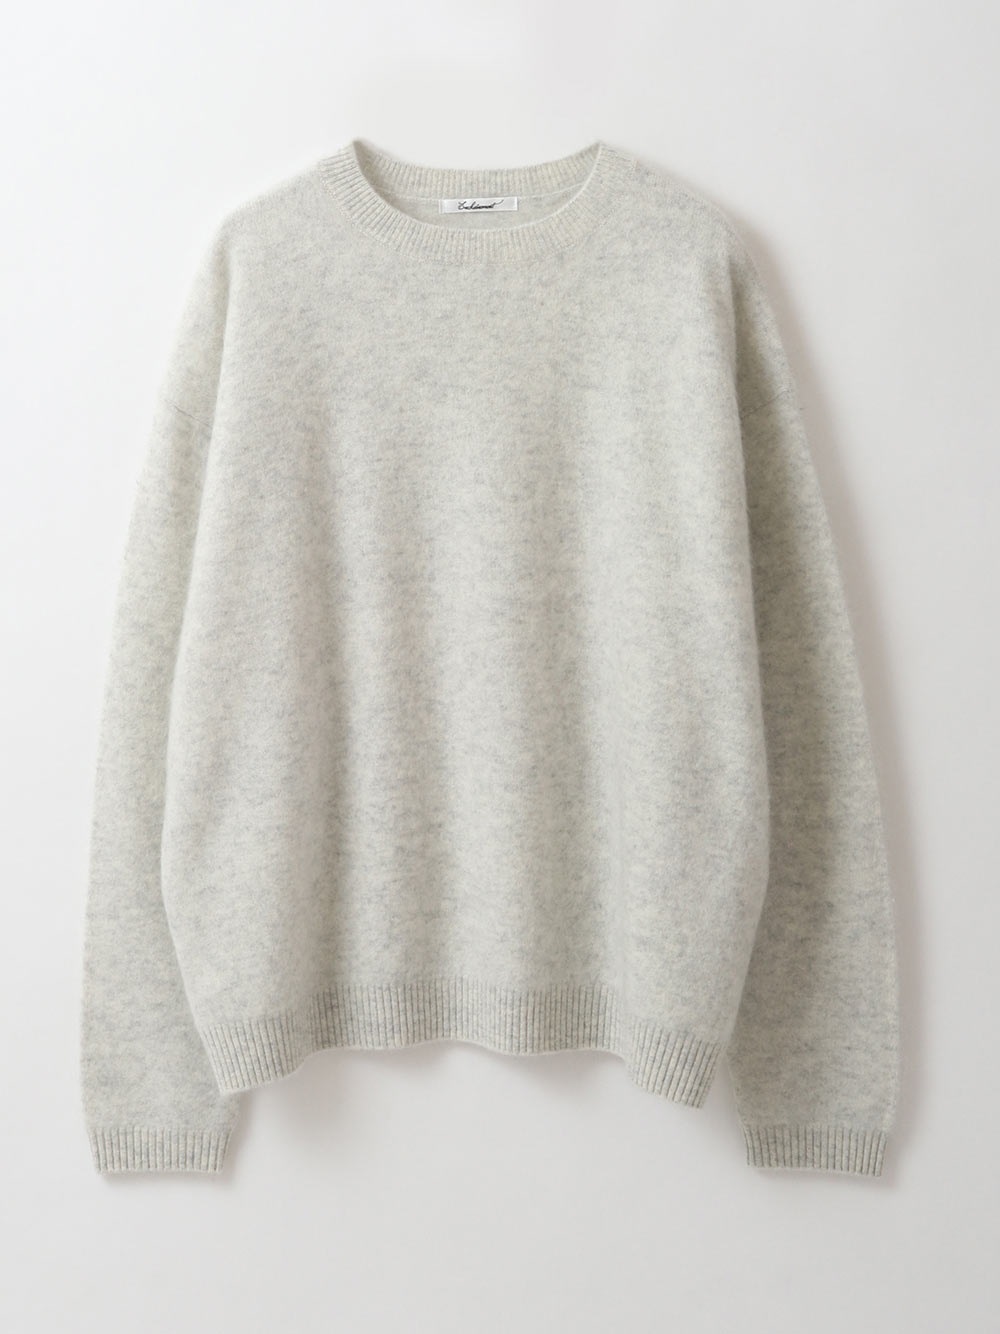 Cashmere Pullover [Preorder](12ライトグレー-フリー)